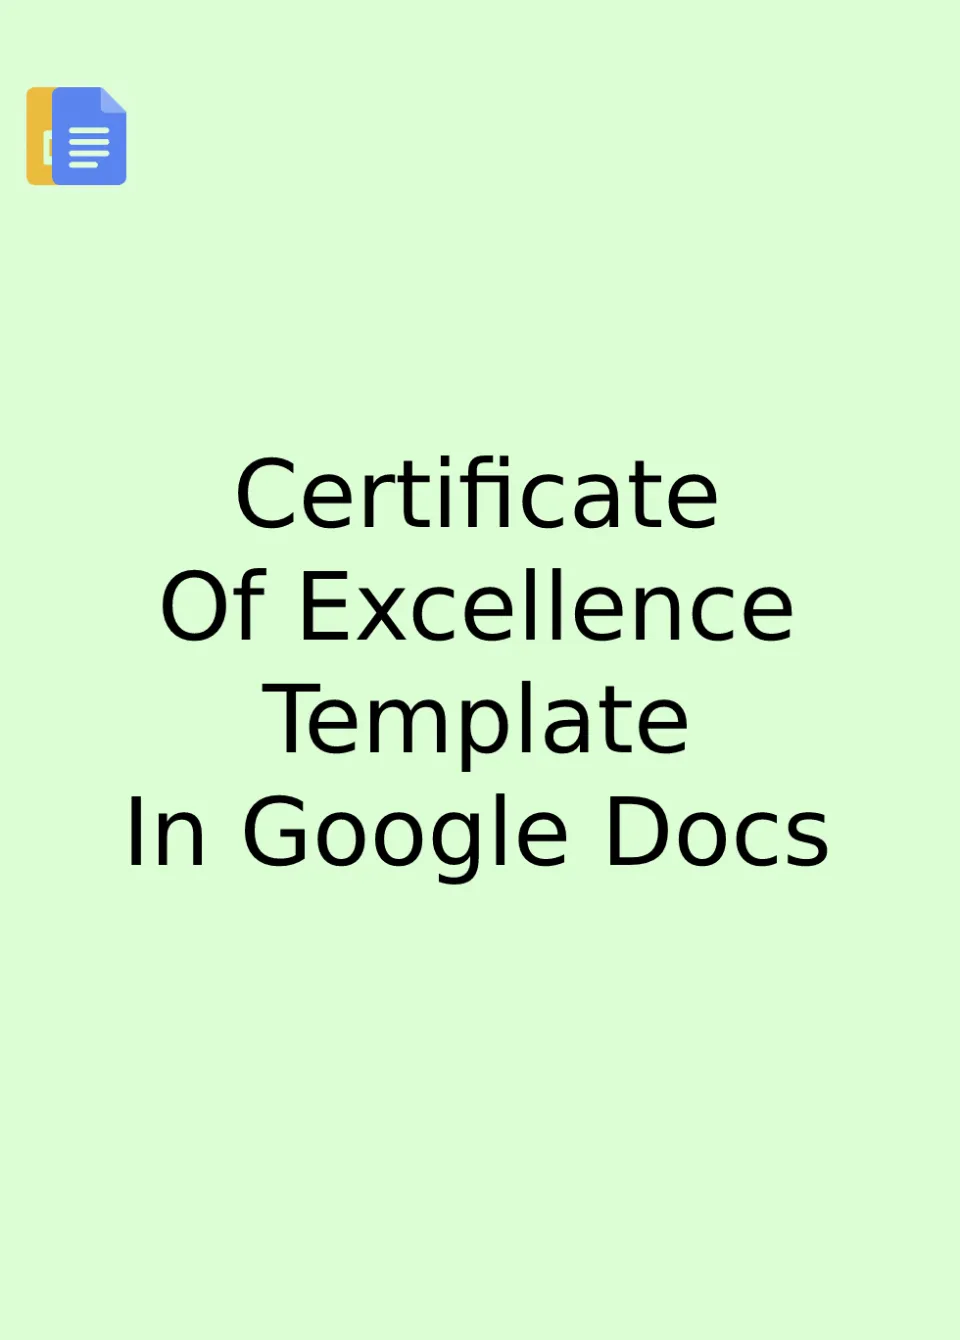 Certificate Of Excellence Template Google Docs